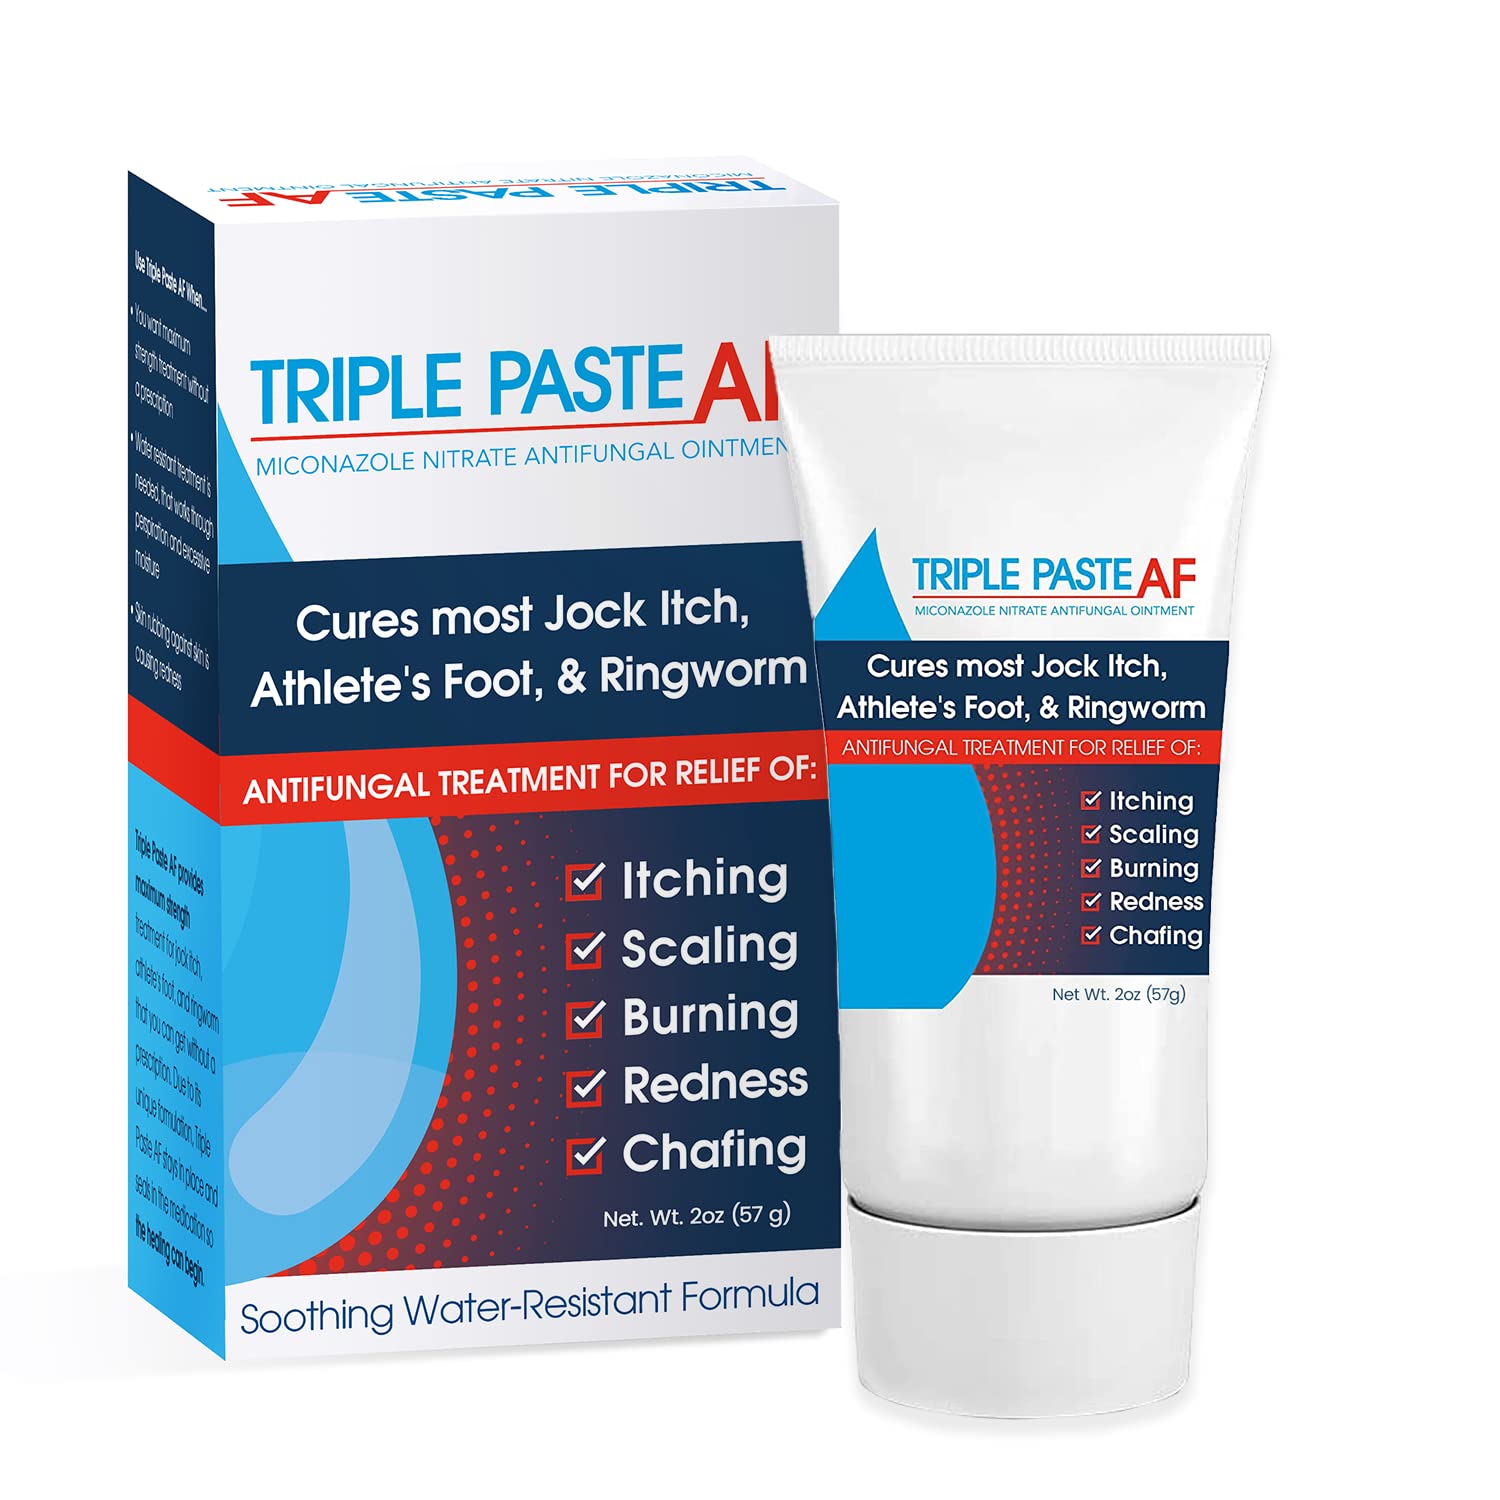 Triple Paste AF Anti Fungal Ointment for Skin Treats Most Jock Itch, Athletes Foot and Ringworm - 2% Miconazole Antifungal Cream - 2 Oz Tube (Packaging May Vary)